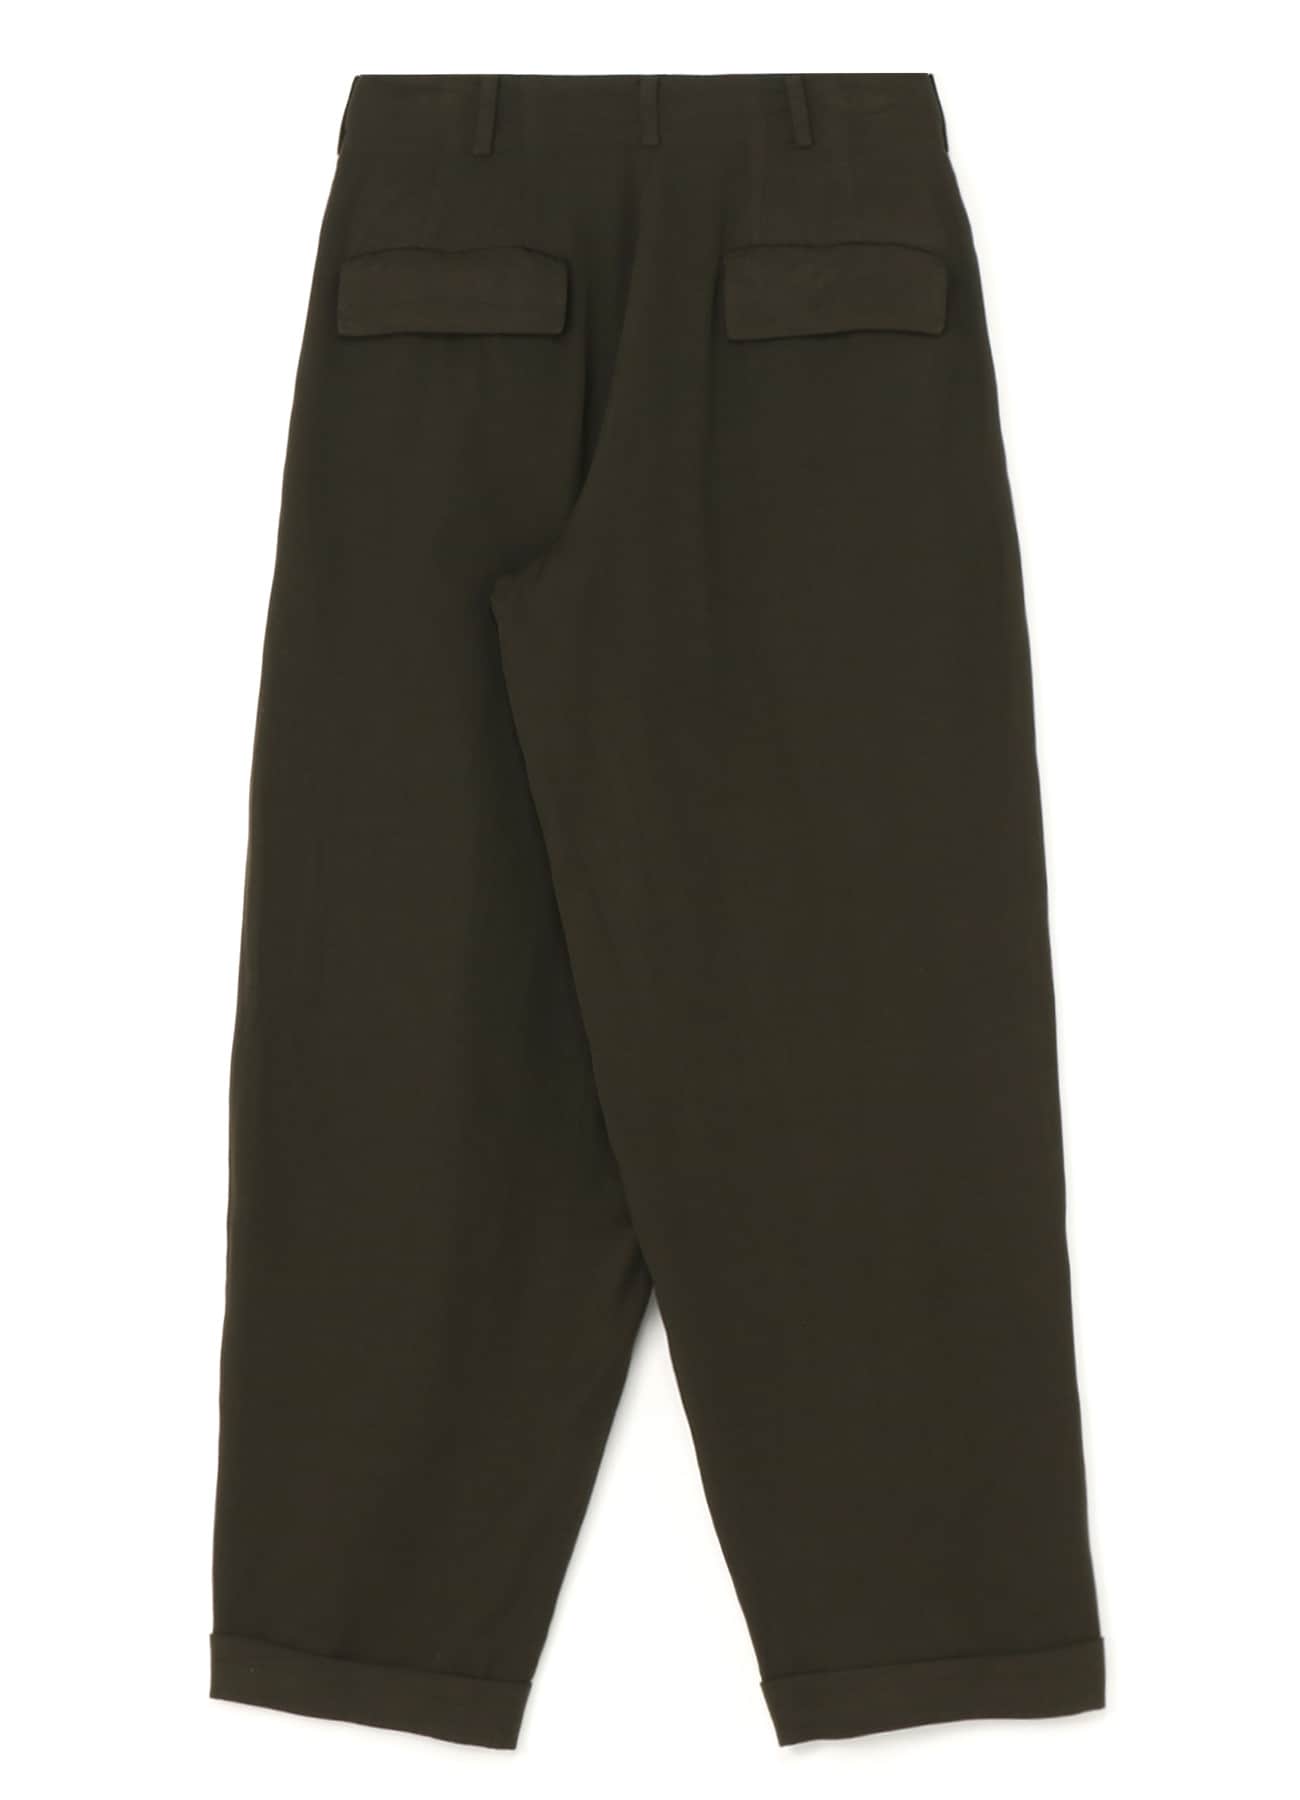 GARMENT-DYED CELLULOSE TWILL DOUBLE PLEATED CUFFED HEM PANTS(XS 